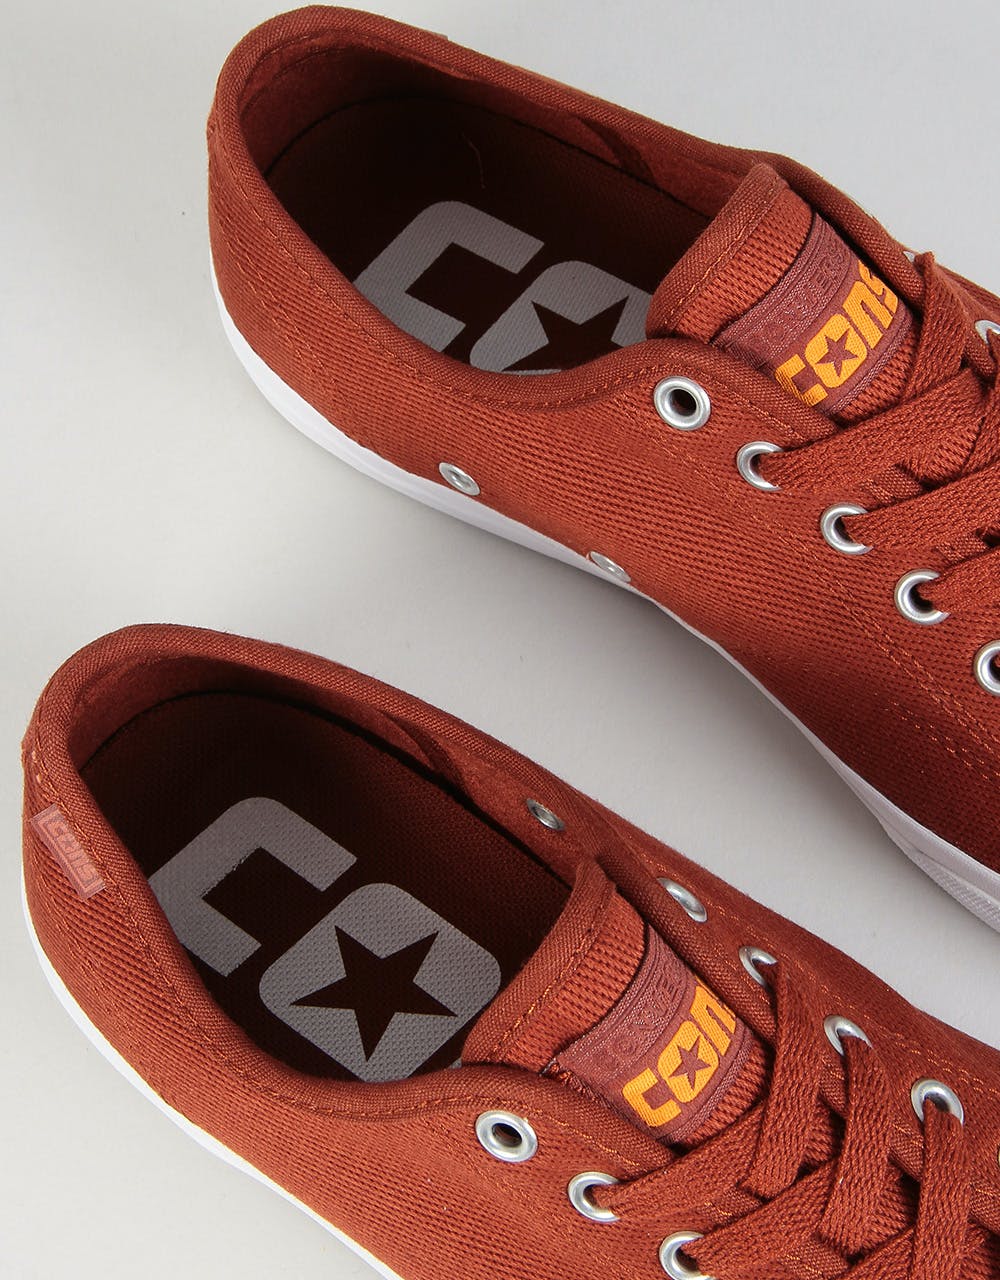 Converse Jack Purcell Pro Ox Skate Shoes - Cinnamon/White/Orange Rind